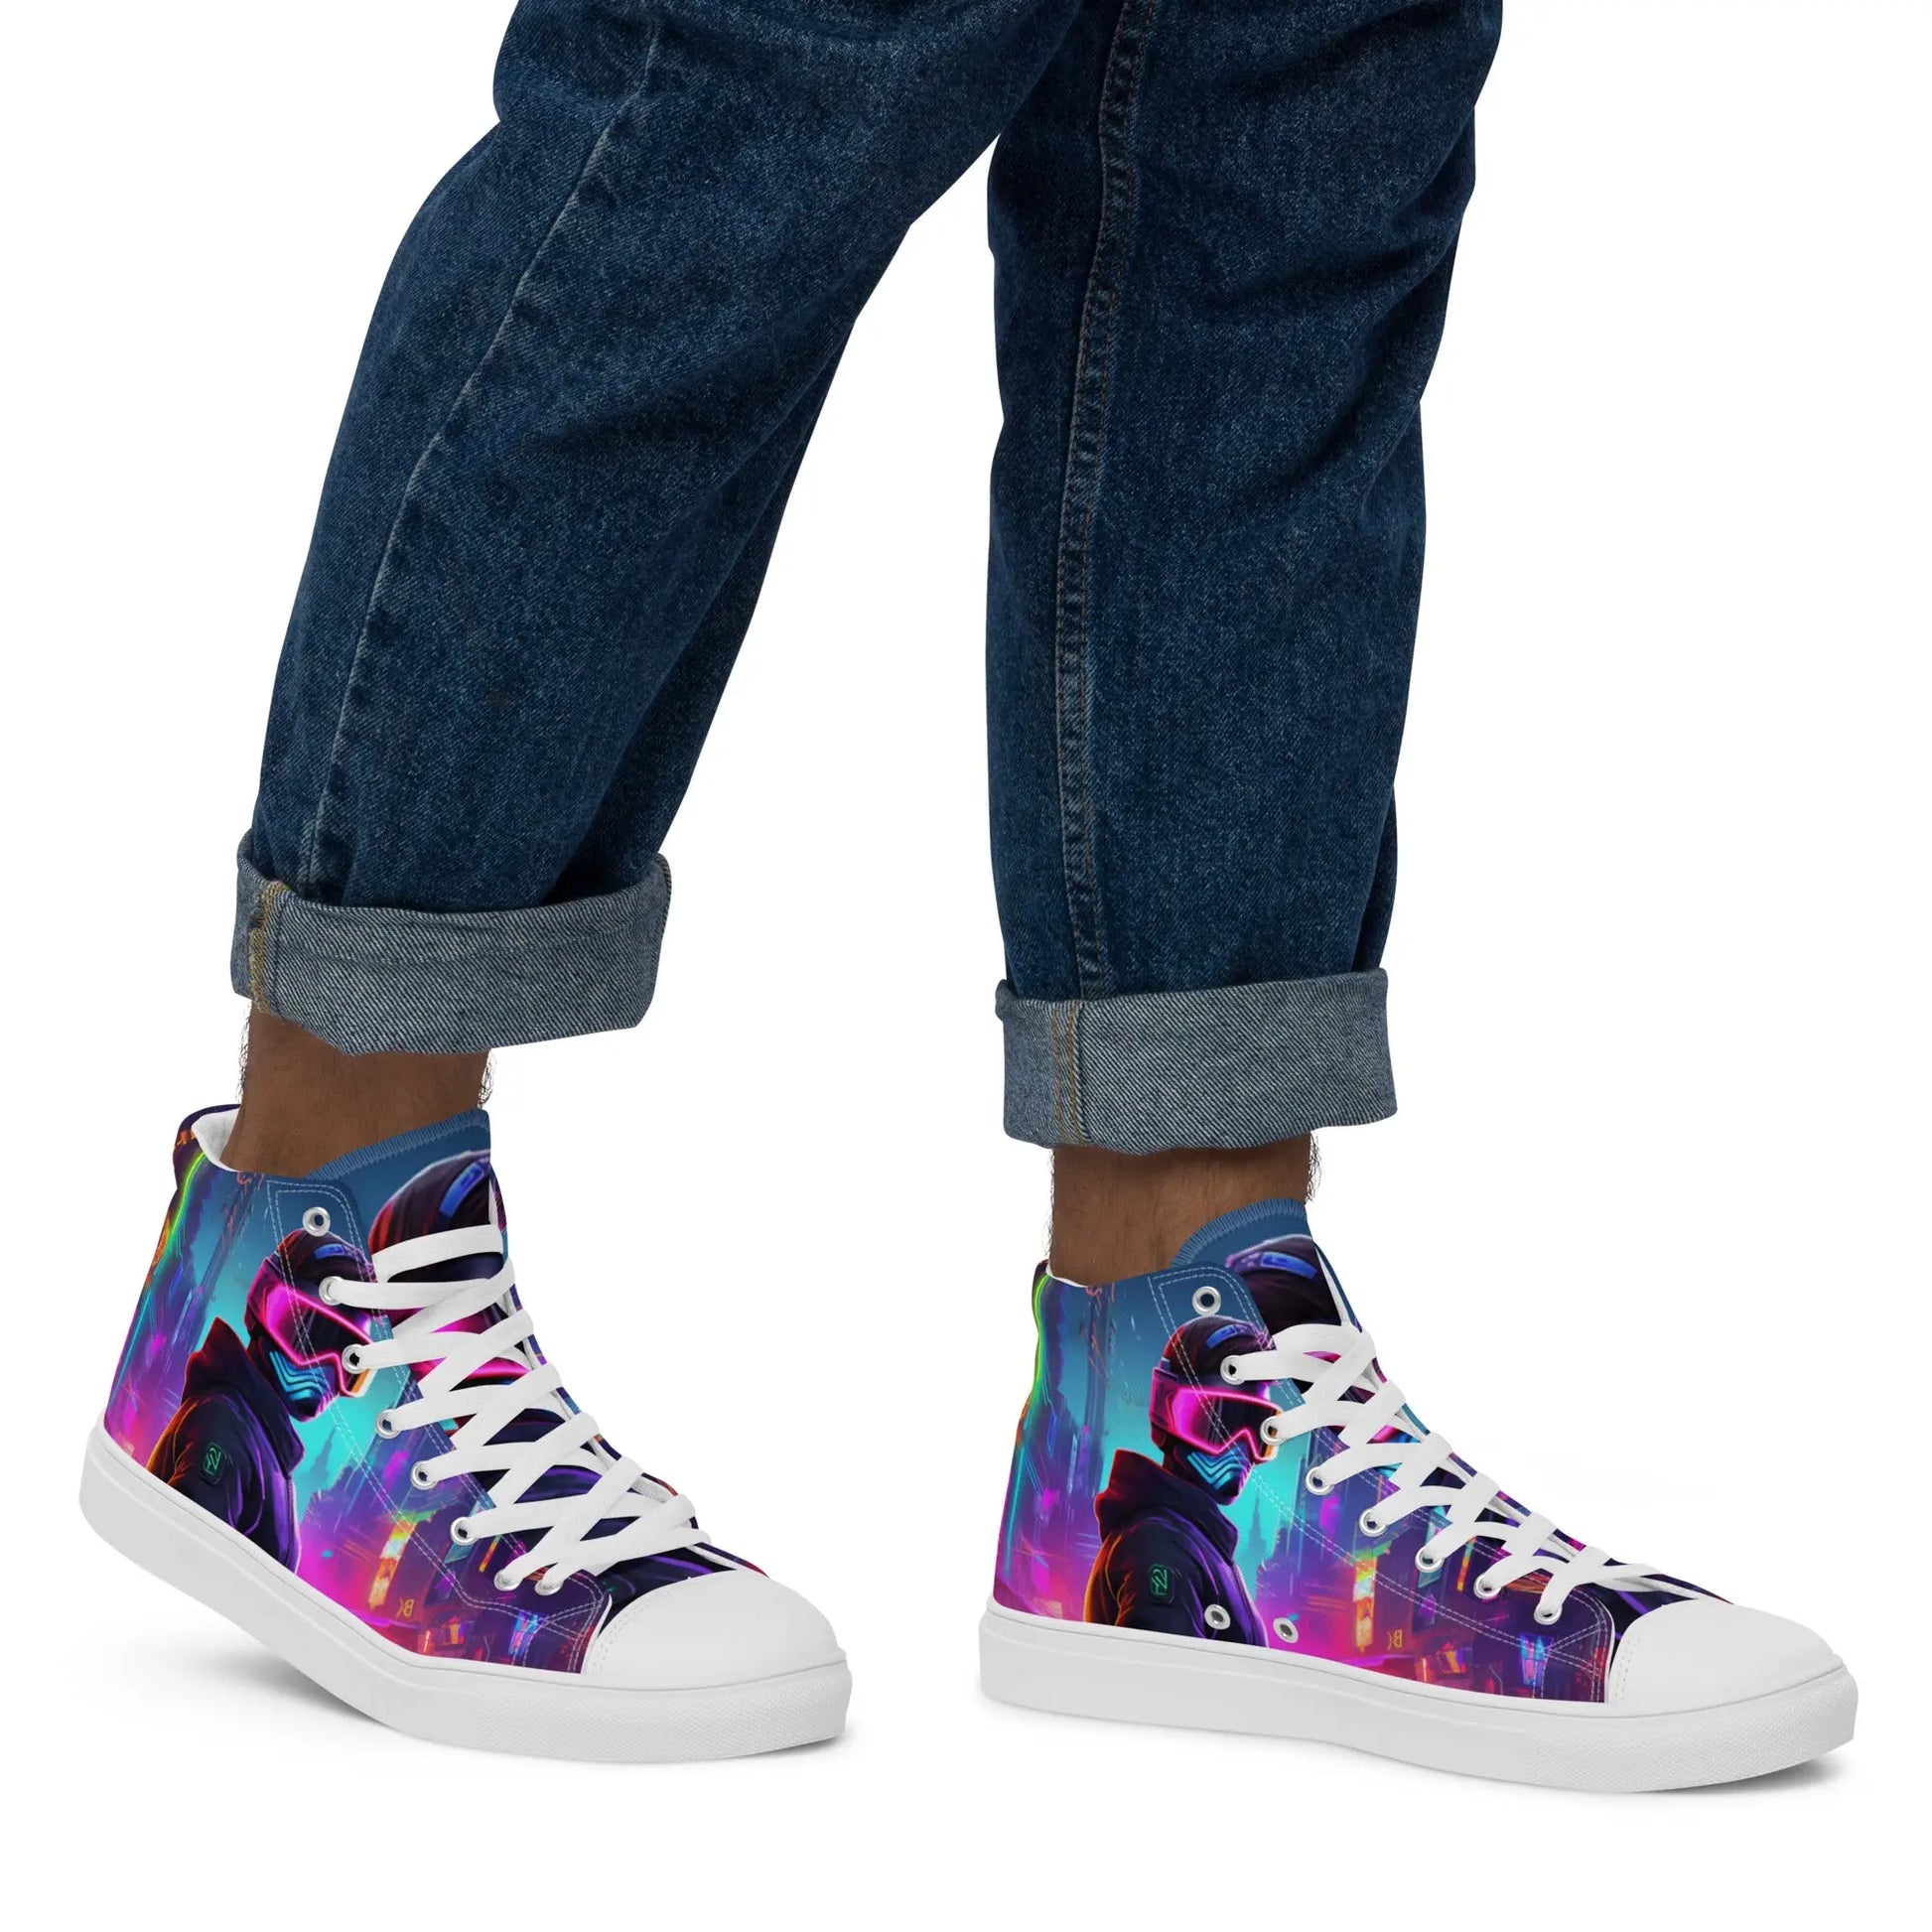 CityGlow High Top Sneakers: AI-Engineered, Unleash Your Gaming Style with Unisex, Durable, Comfortable Urban-Inspired Design Kinetic Footwear